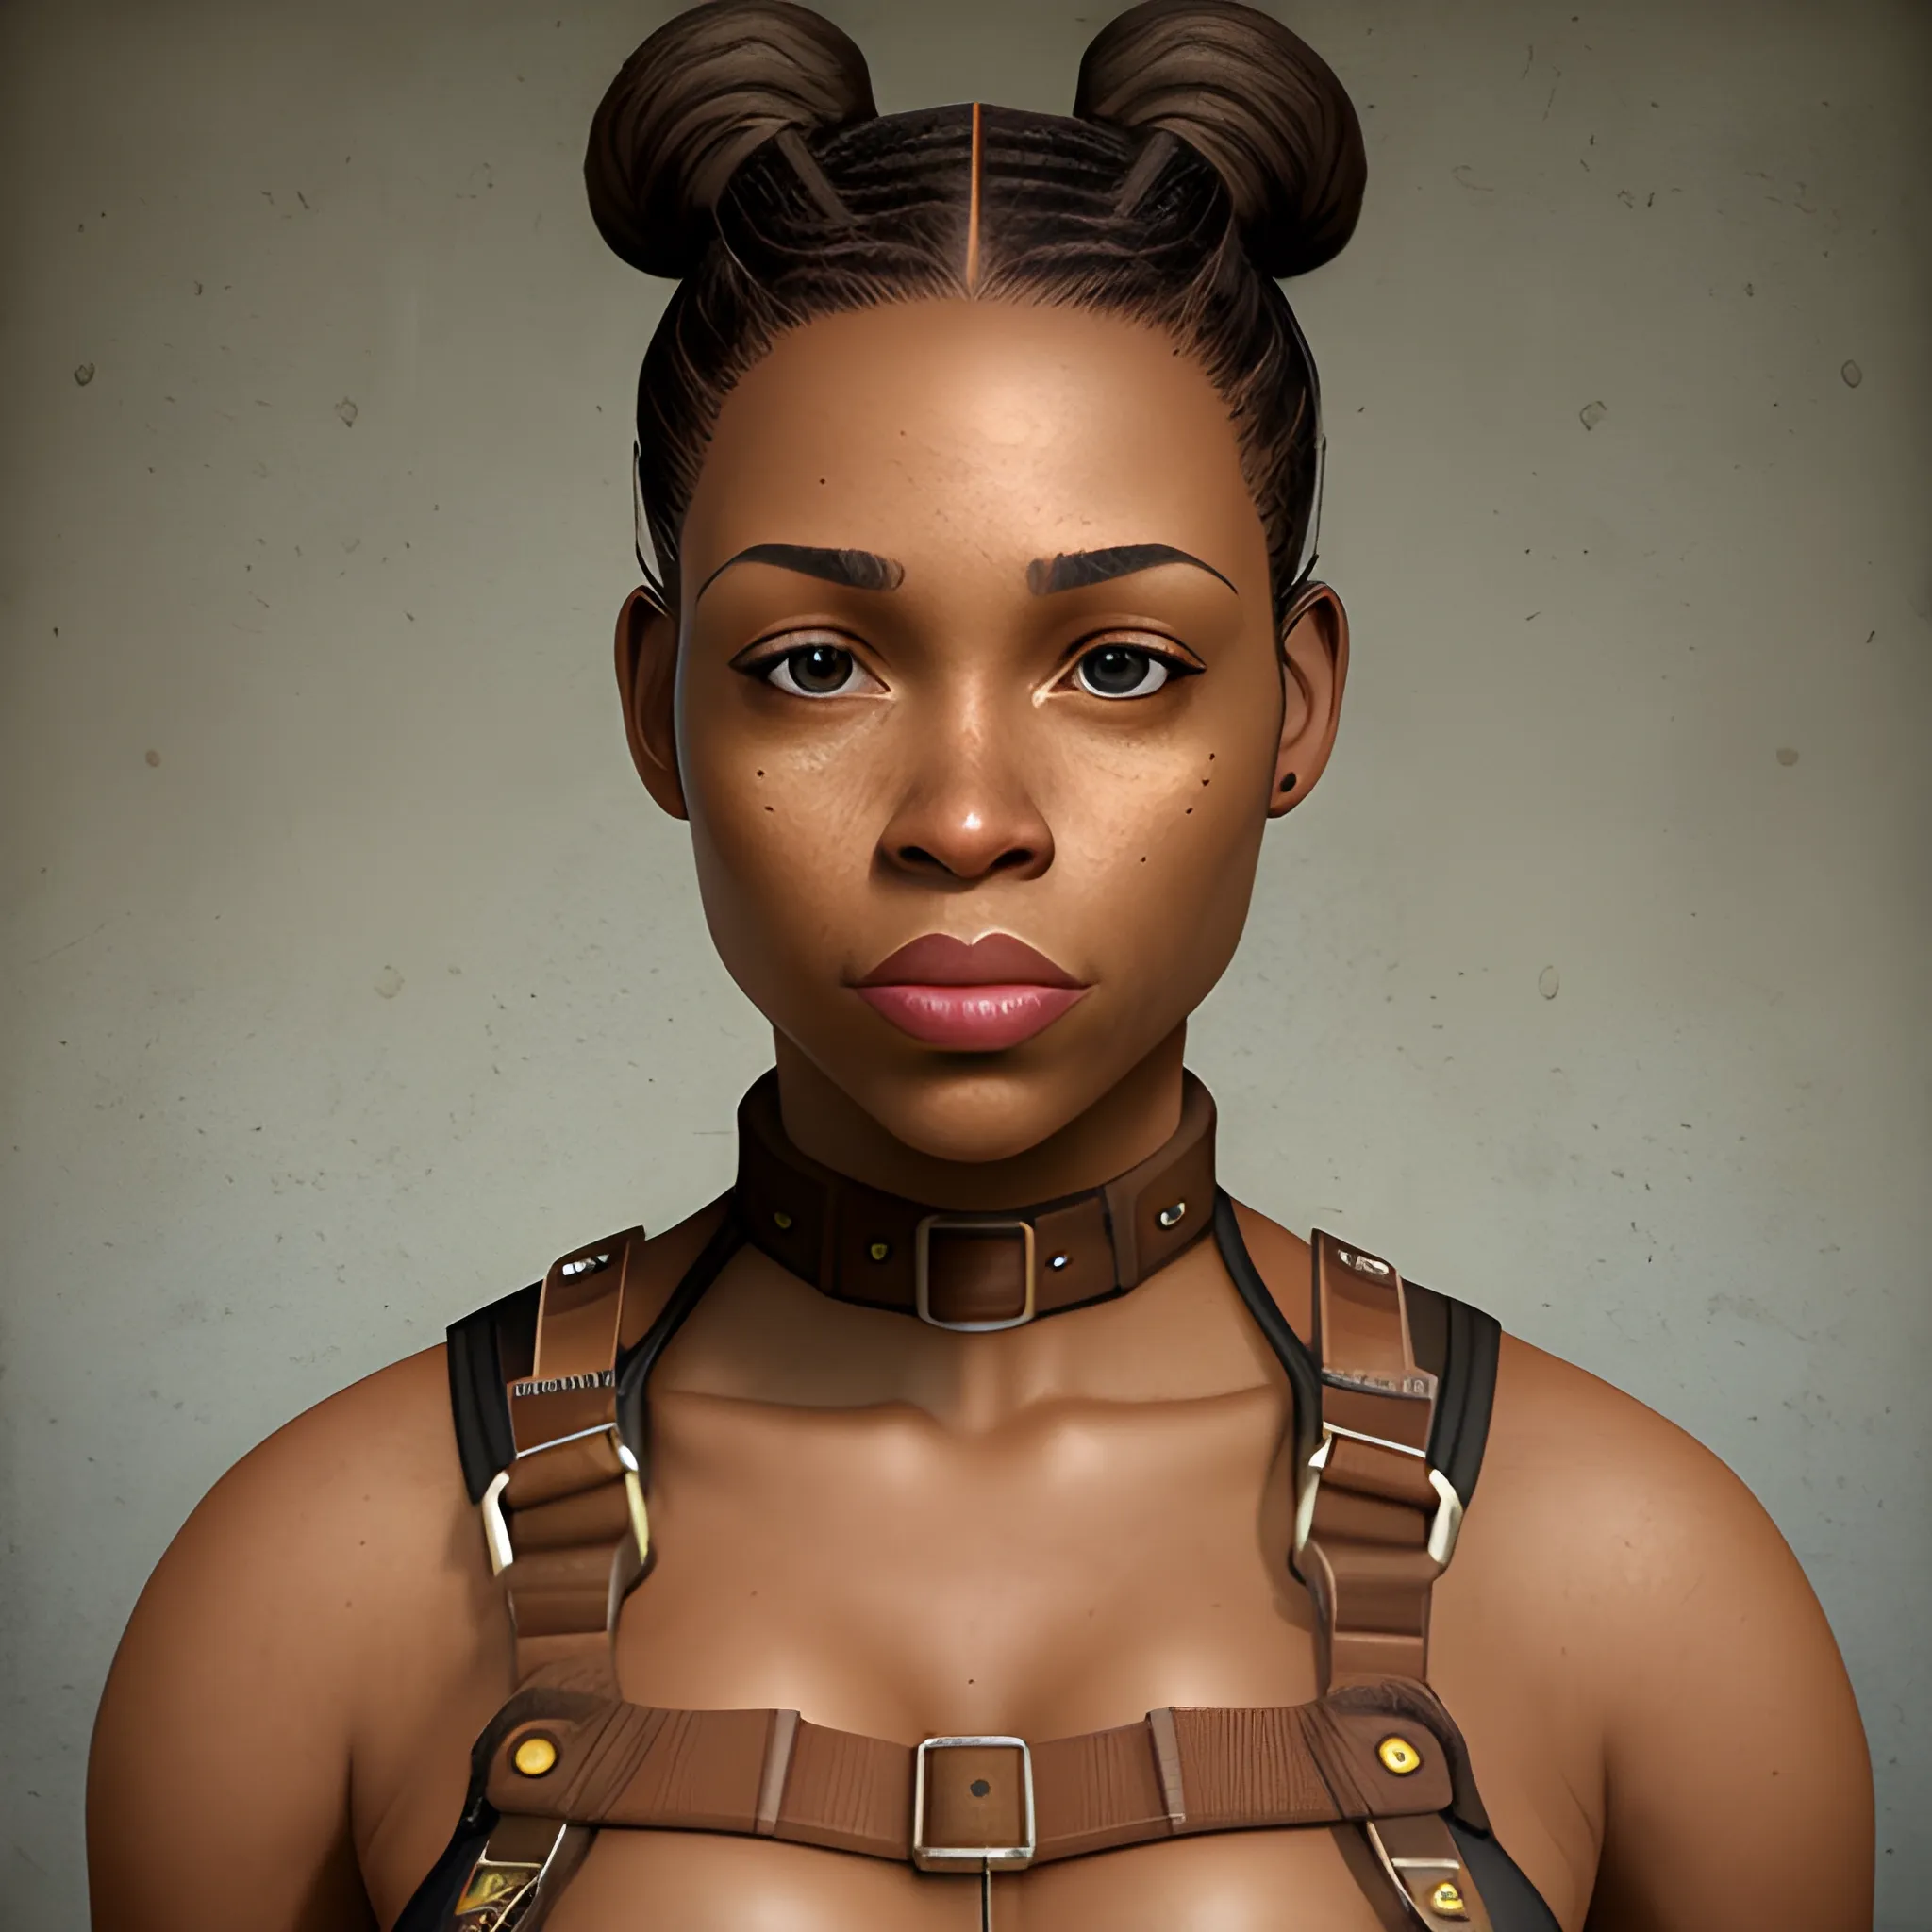 In the style of fallout 1, (masterpiece), (portrait photography), (portrait of an adult African-American female), no makeup, flat chested, harness outfit made out of straps, ponytail, brown hair, brown eyes